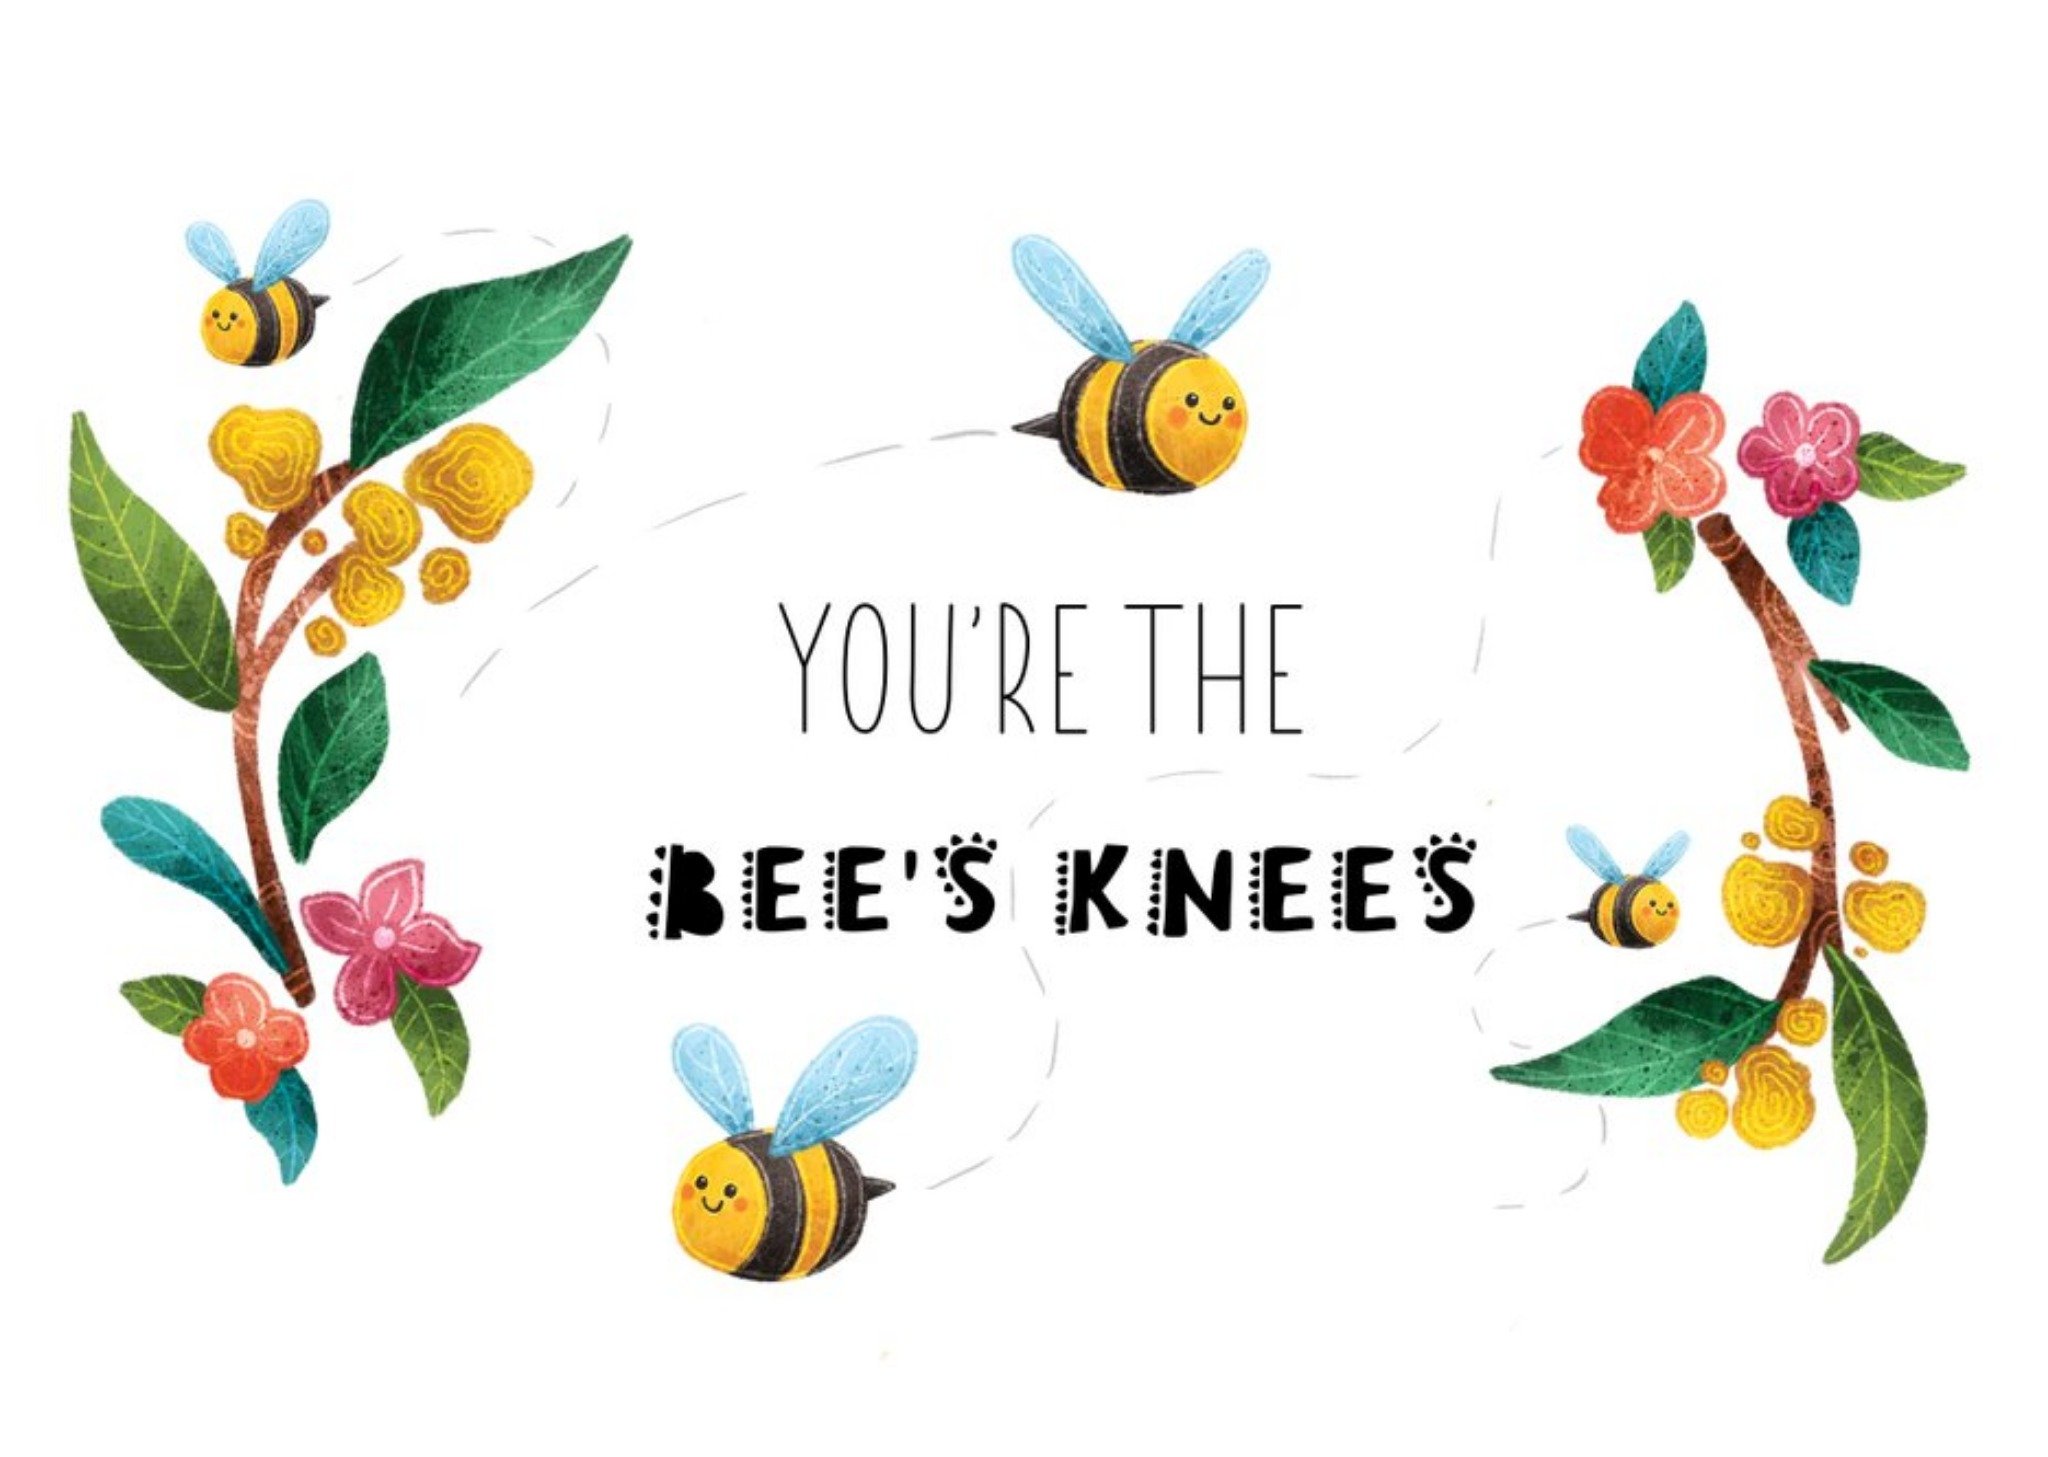 Moonpig Illustration Of Bees Buzzing Around Flowers You're The Bee's Knees Card, Large